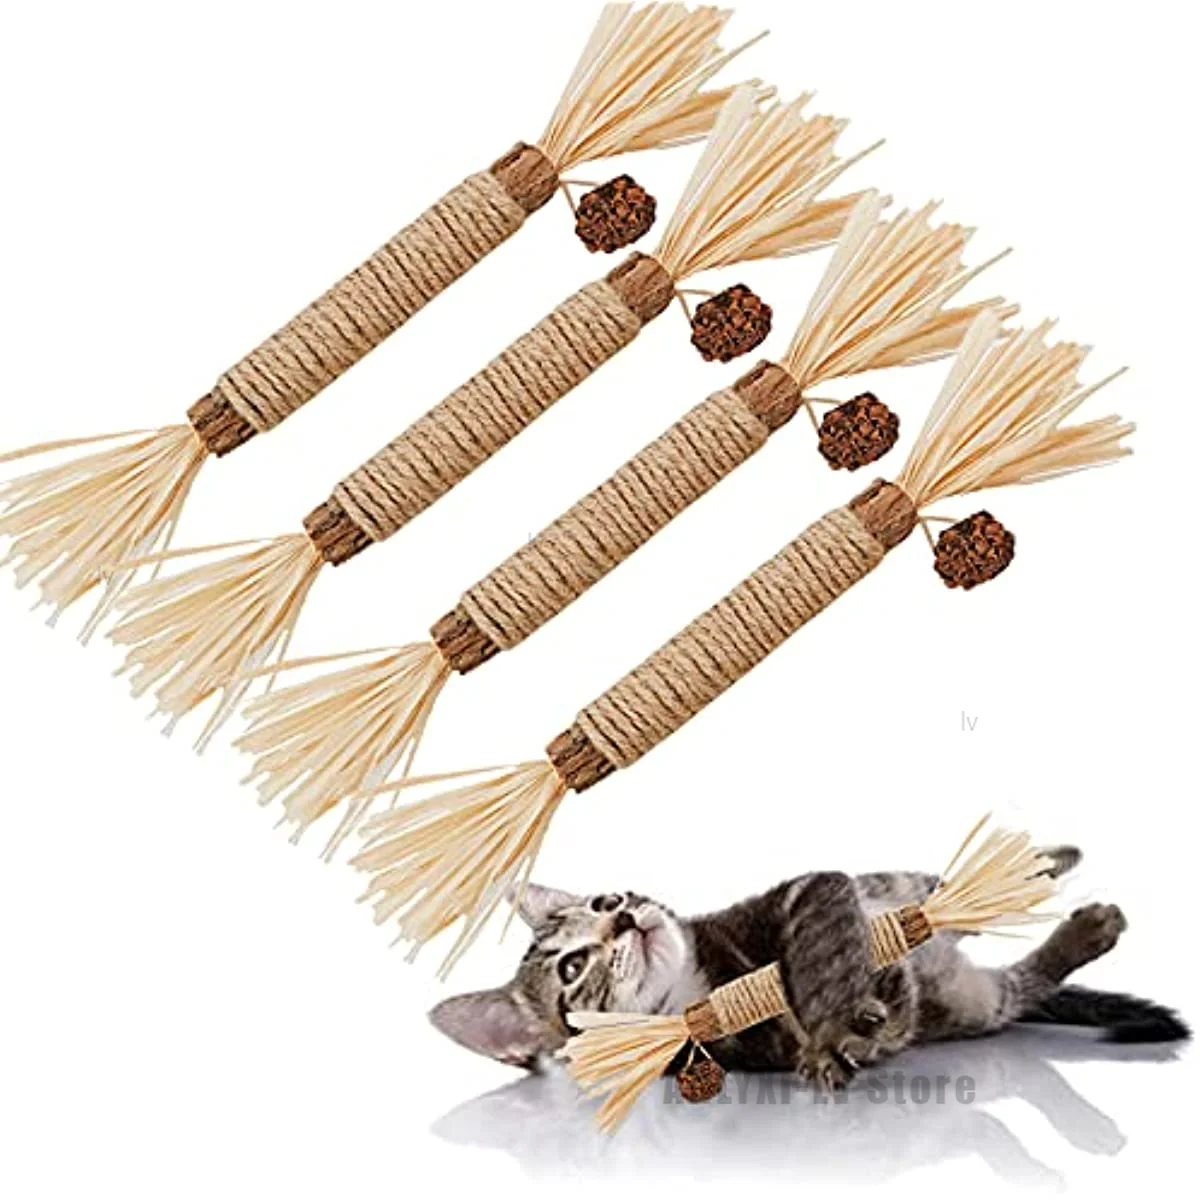 

Cat Toys Silvervine Chew Stick Kitten Treat Catnip Toy Kitty Natural Stuff with Catnip for Cleaning Teeth Dental Cats snacks